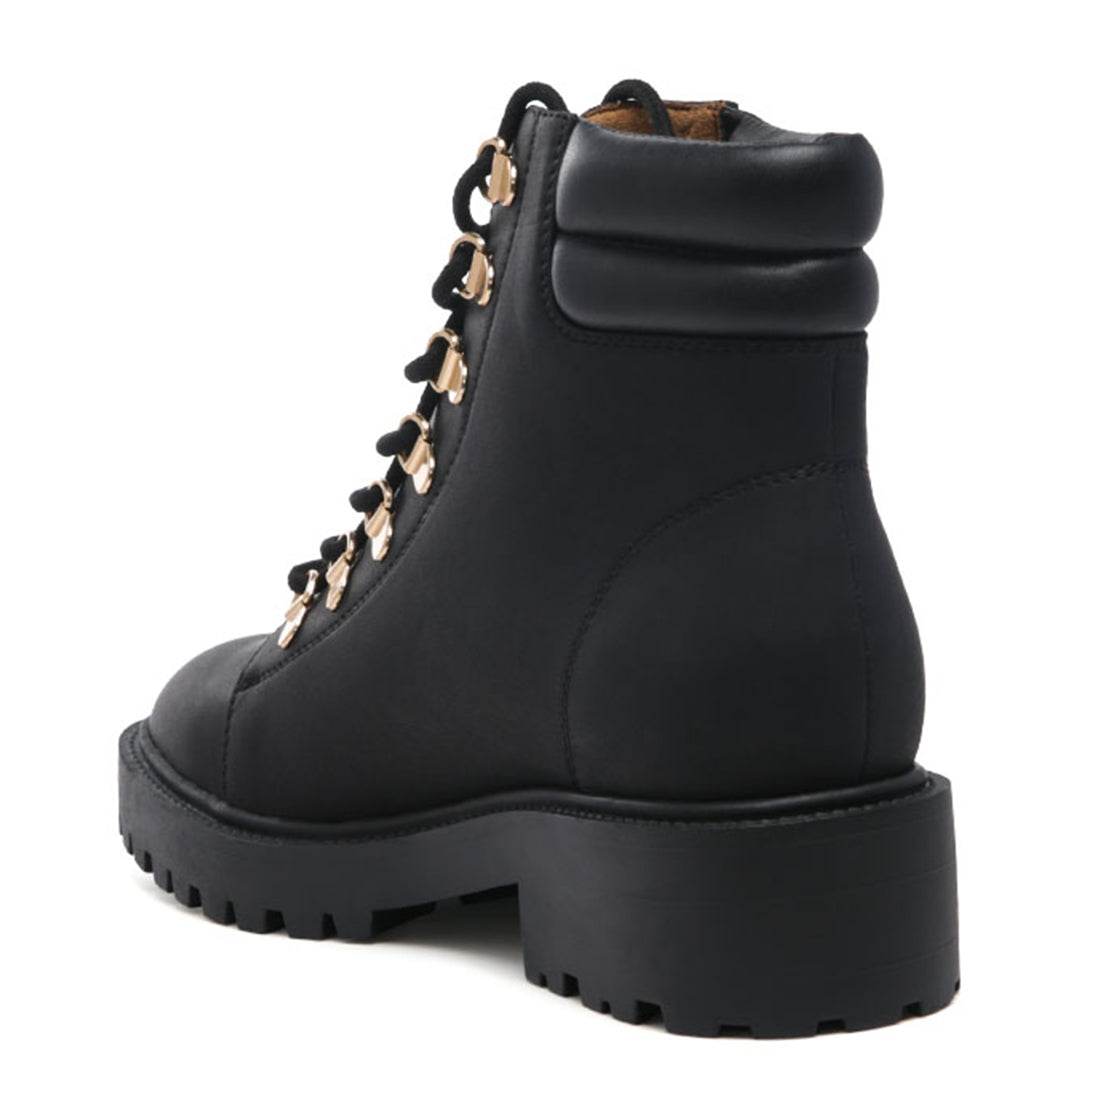 Black Smooth lace-Up Boot - UK4